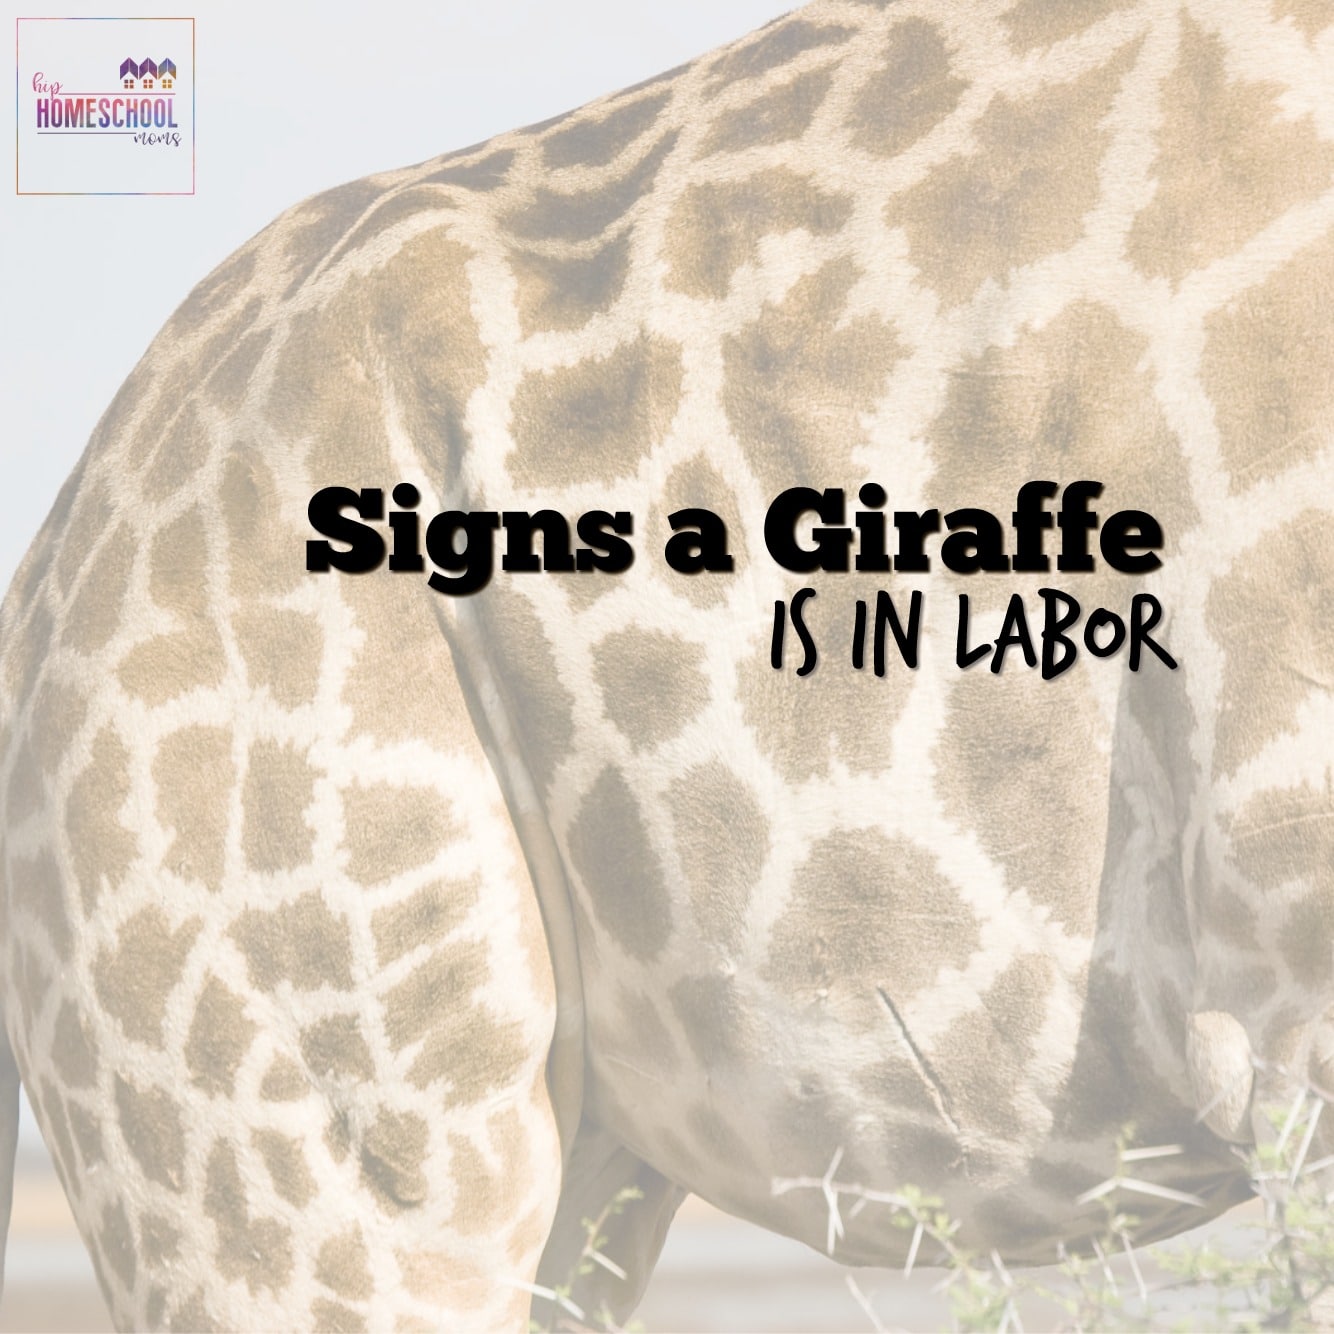 Signs a Giraffe is in Labor